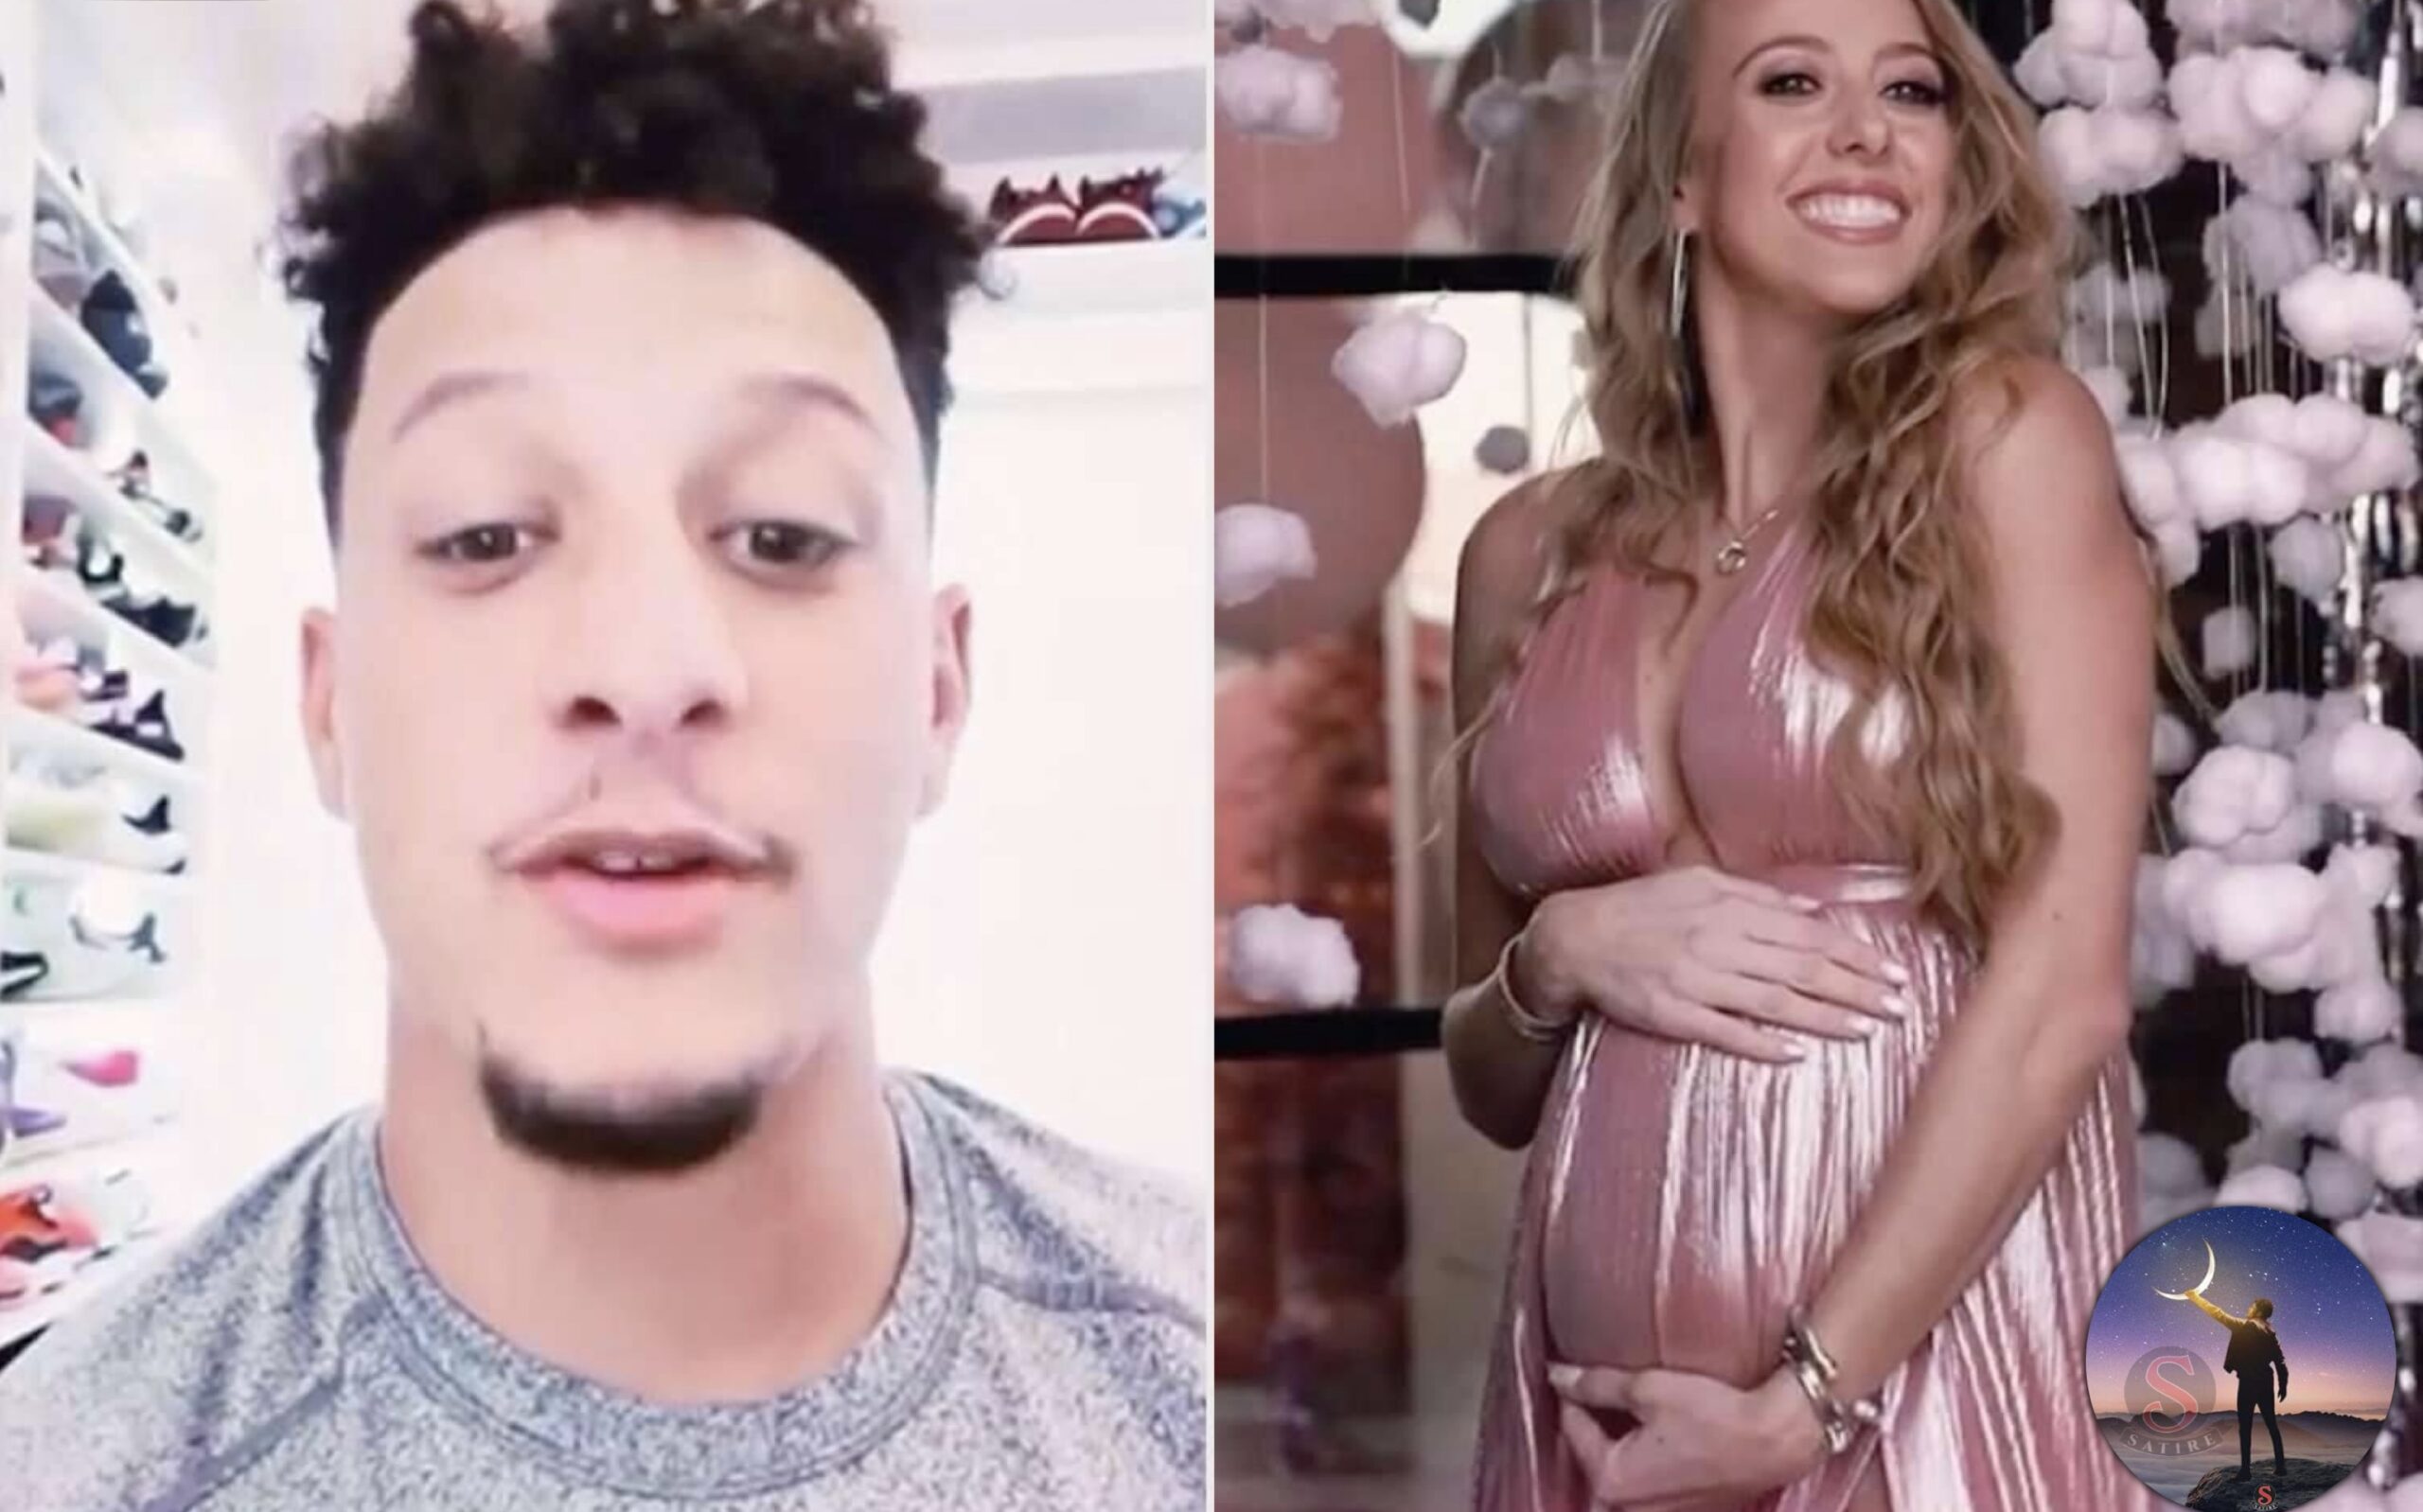 Patrick Mahomes, overwhelmed, announced that his wife Brittany Matthews is pregnant with their third child, saying, “God did it!”